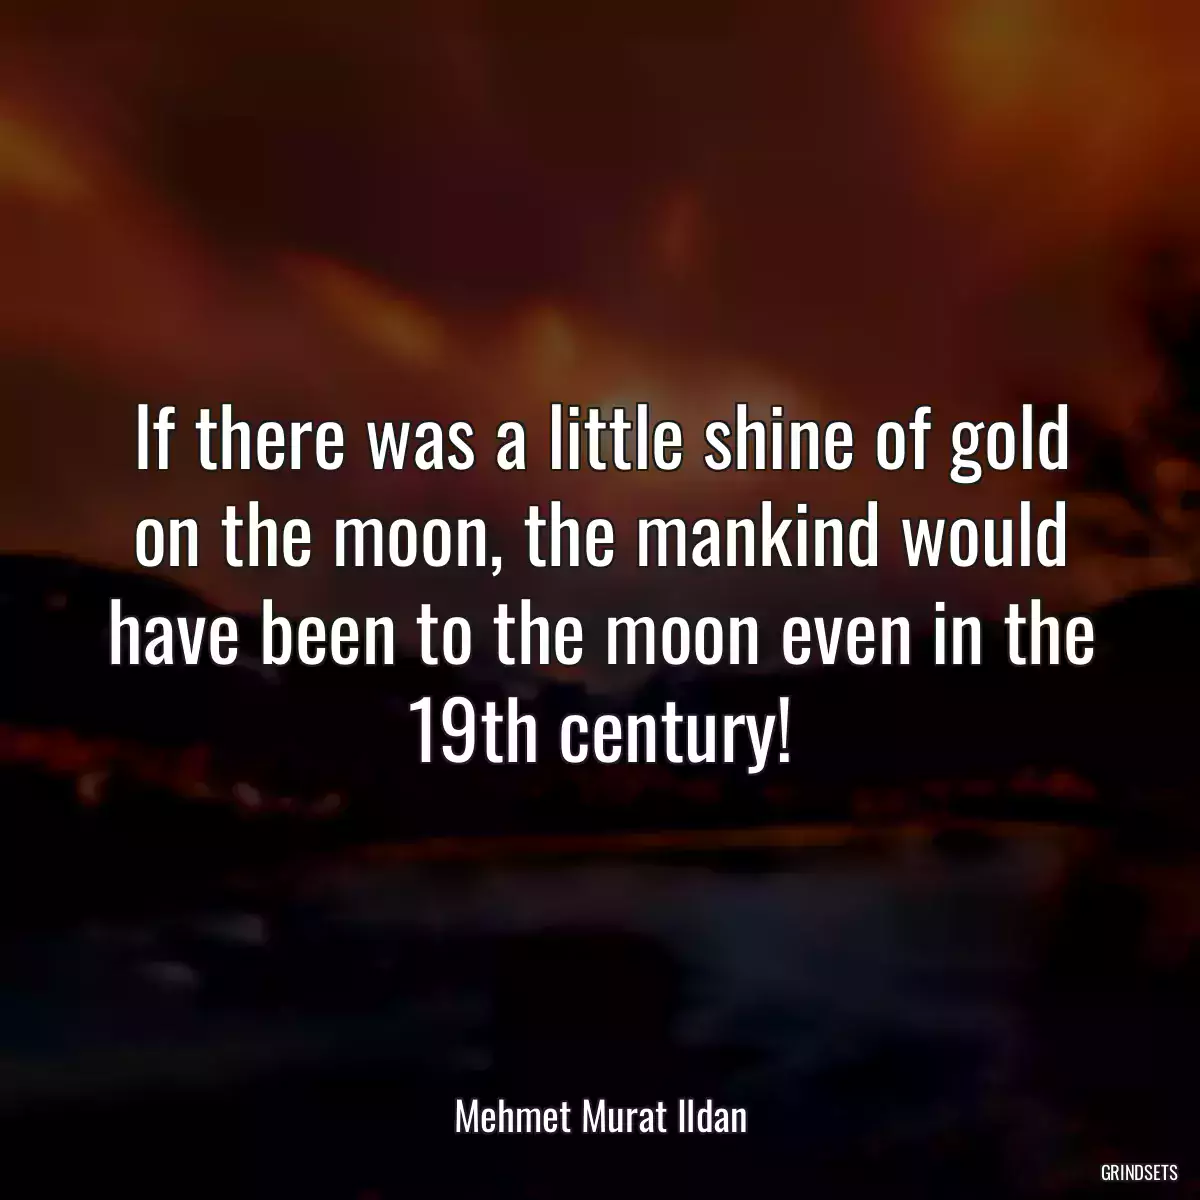 If there was a little shine of gold on the moon, the mankind would have been to the moon even in the 19th century!